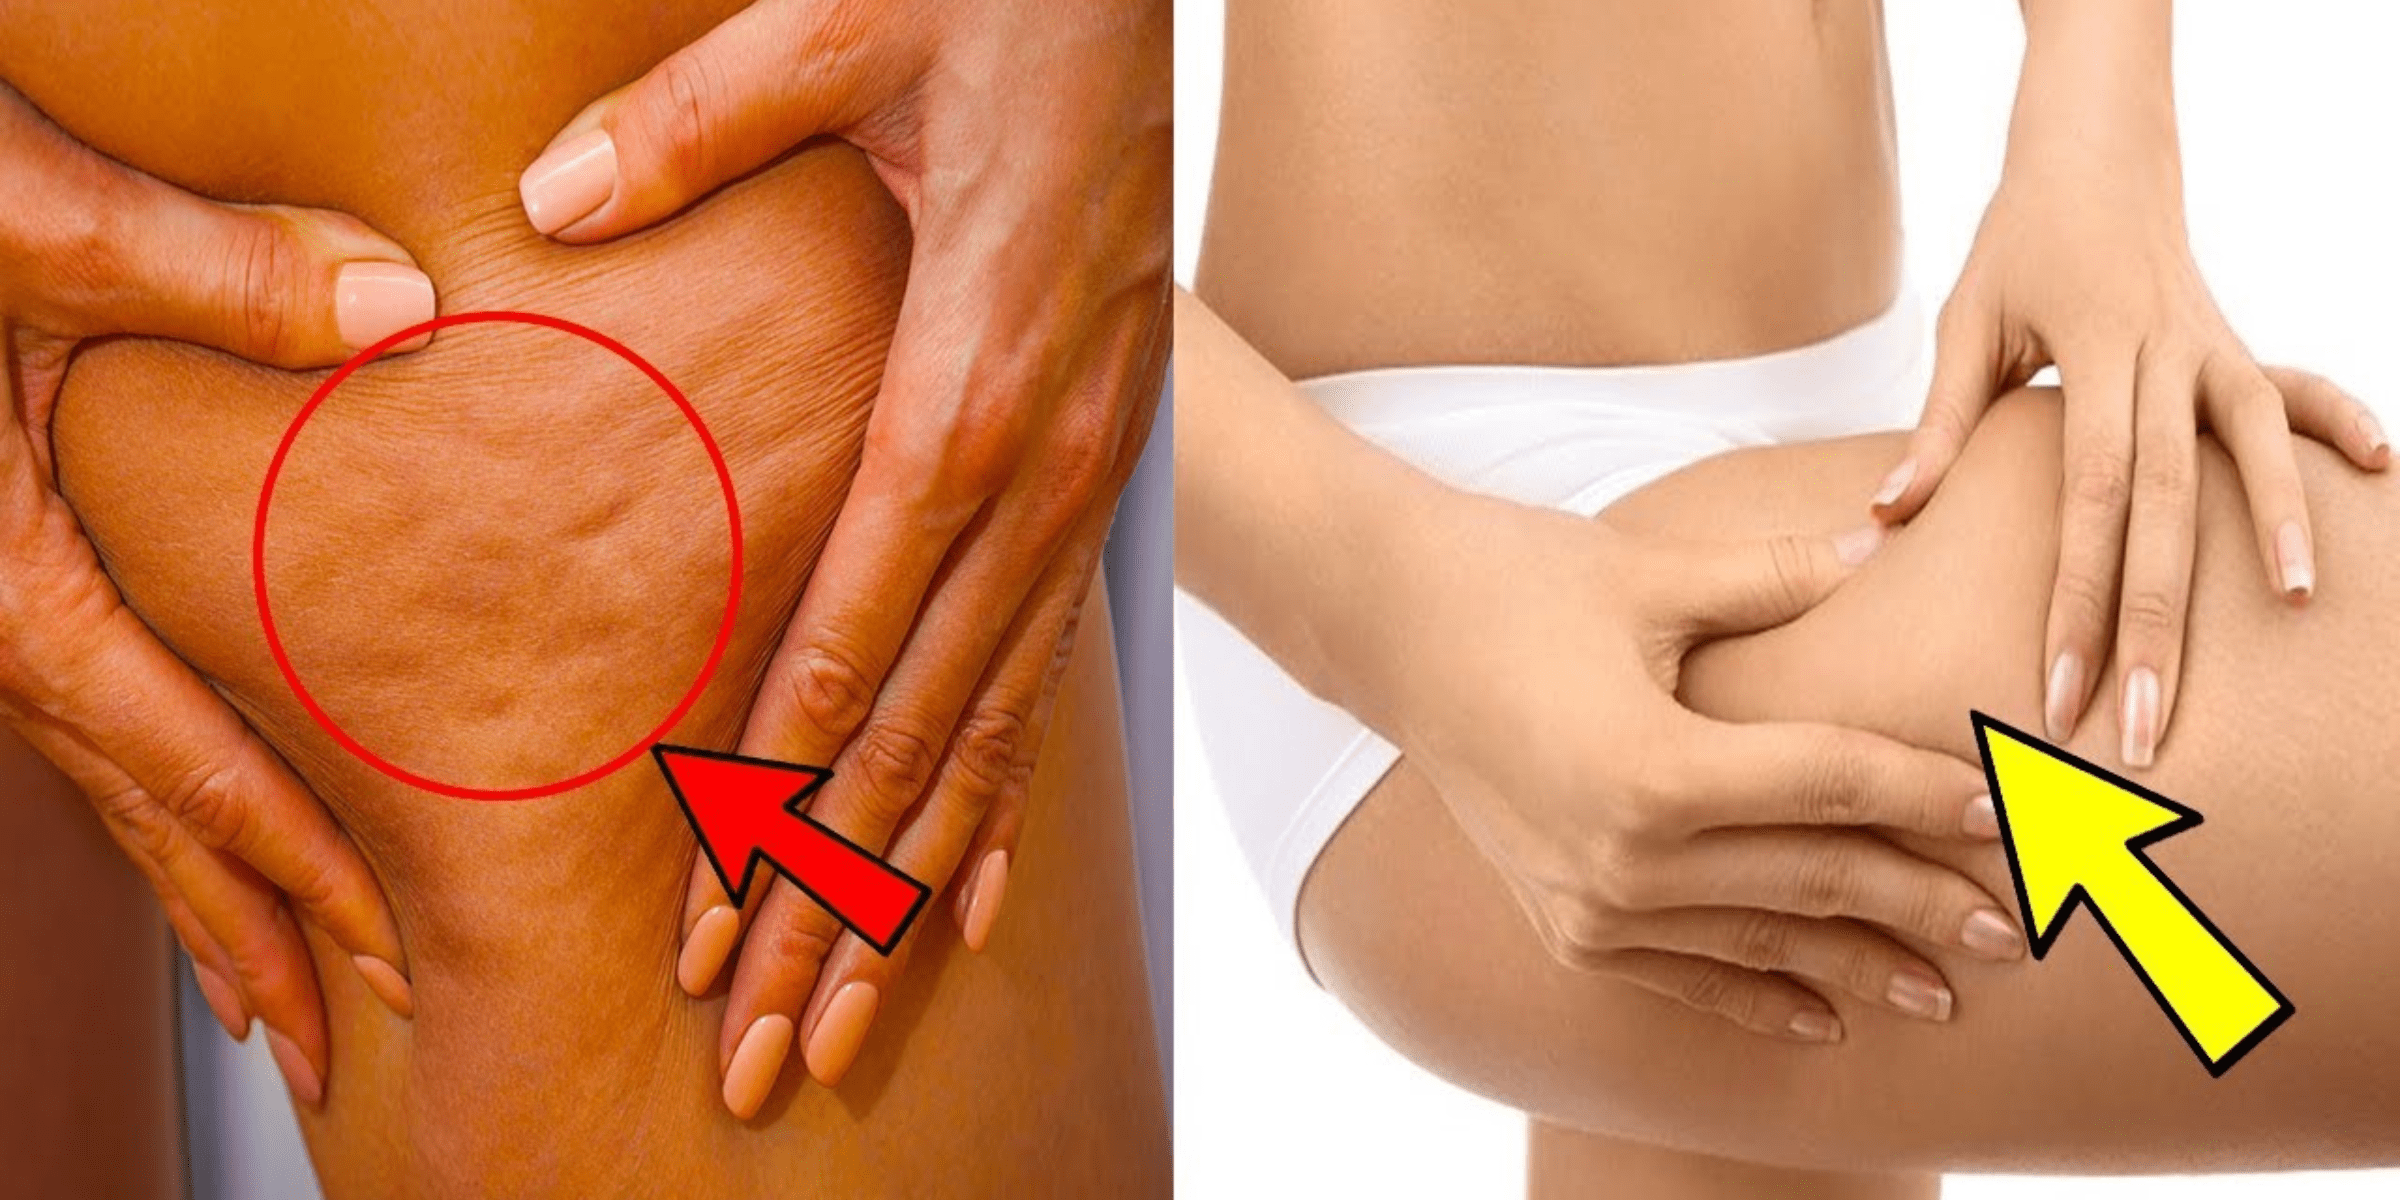 How can I get rid of cellulite fast naturally